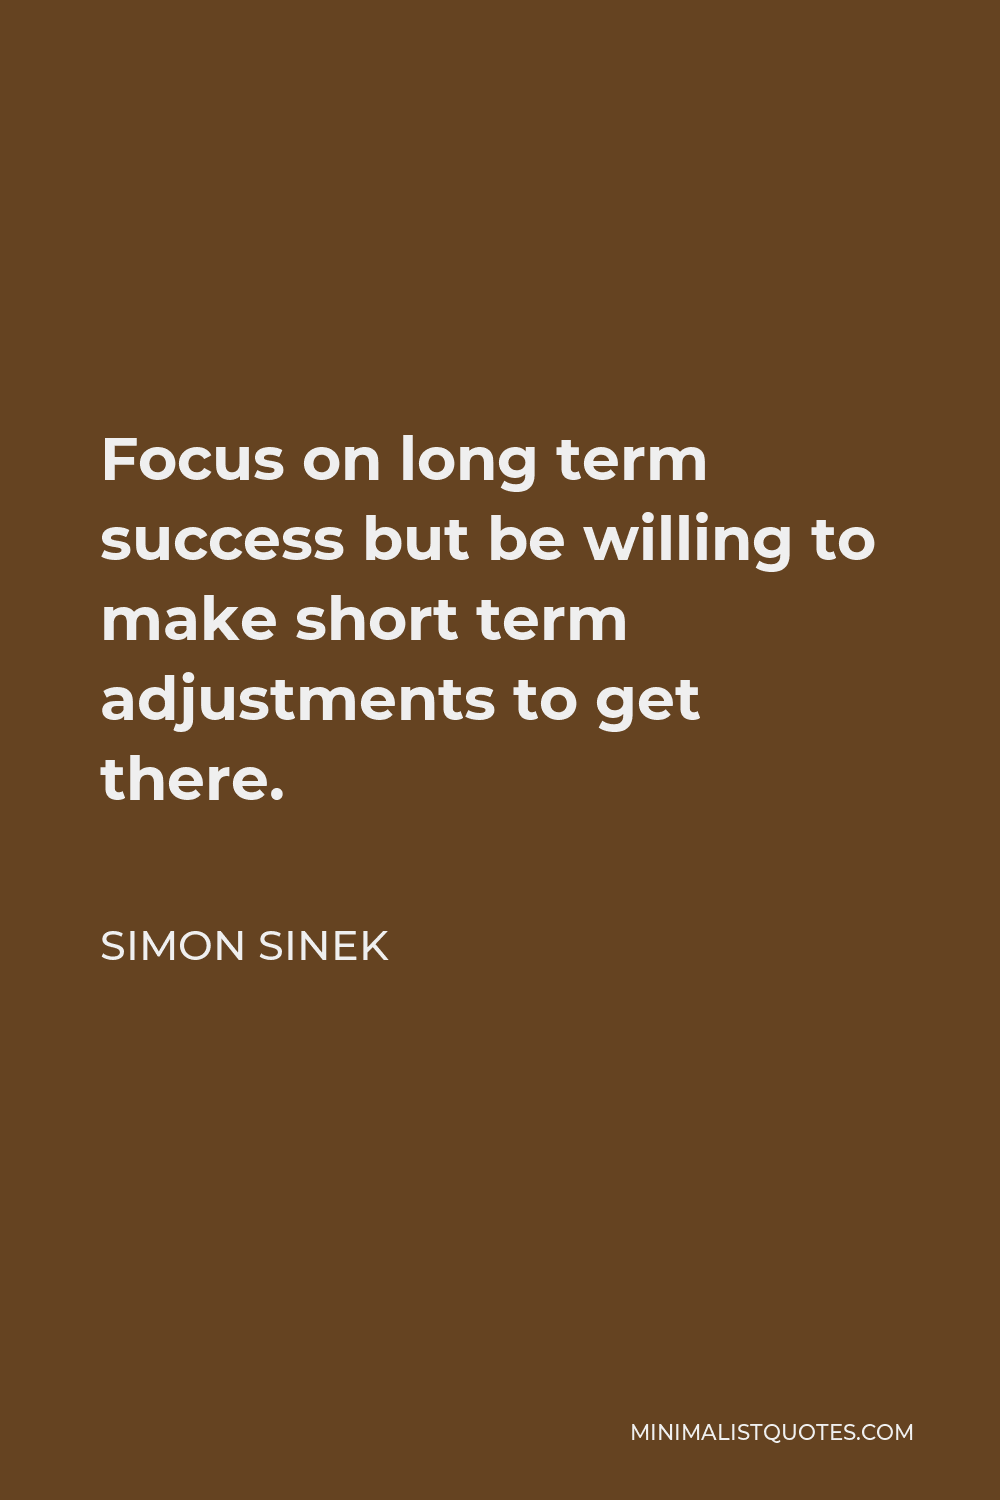 Simon Sinek Quote - Focus on long term success but be willing to make short term adjustments to get there.